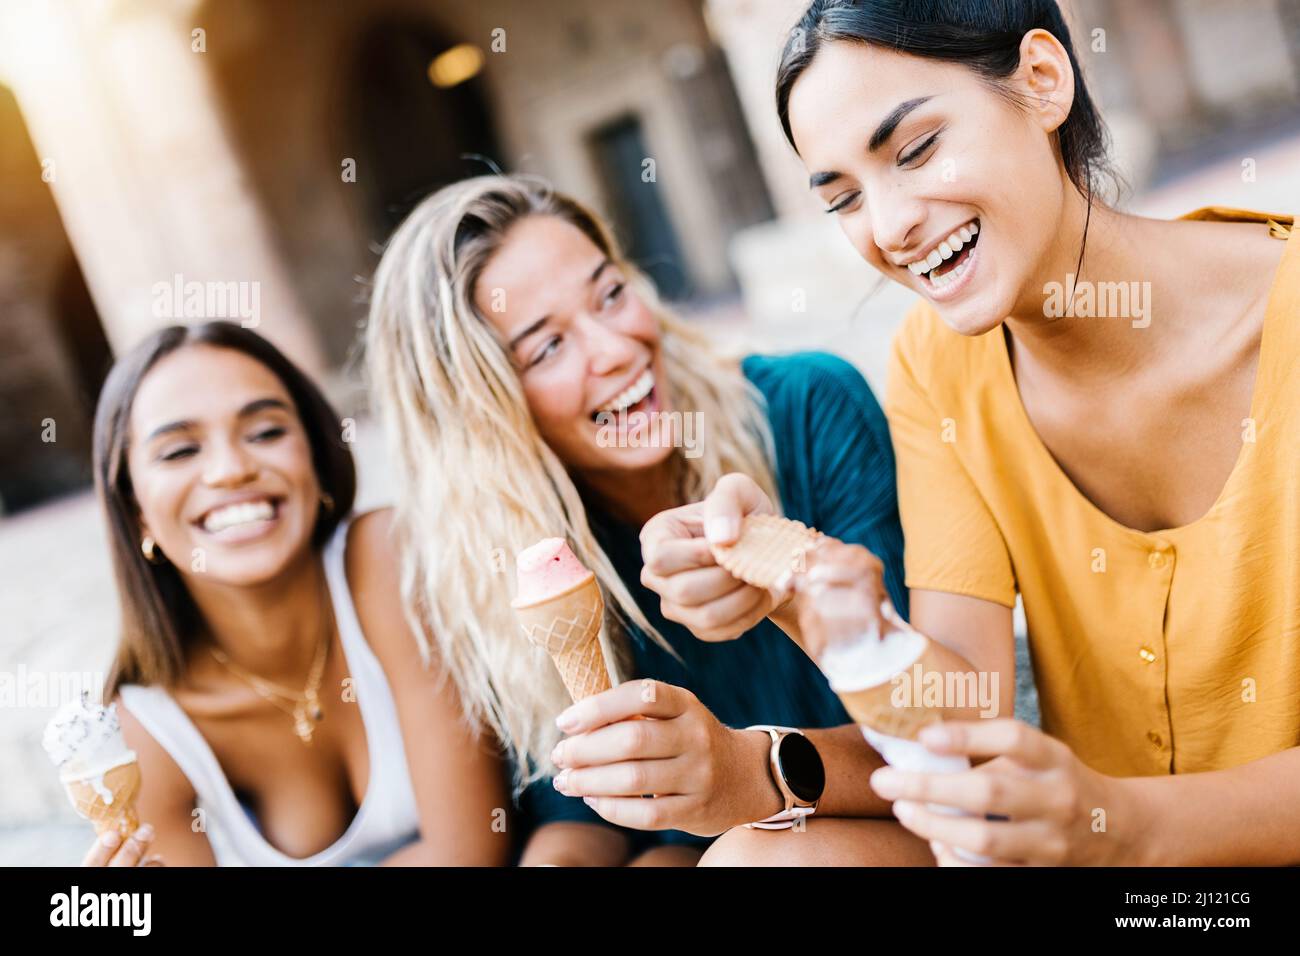 Happy multiethnic women laughing together outdoors Stock Photo